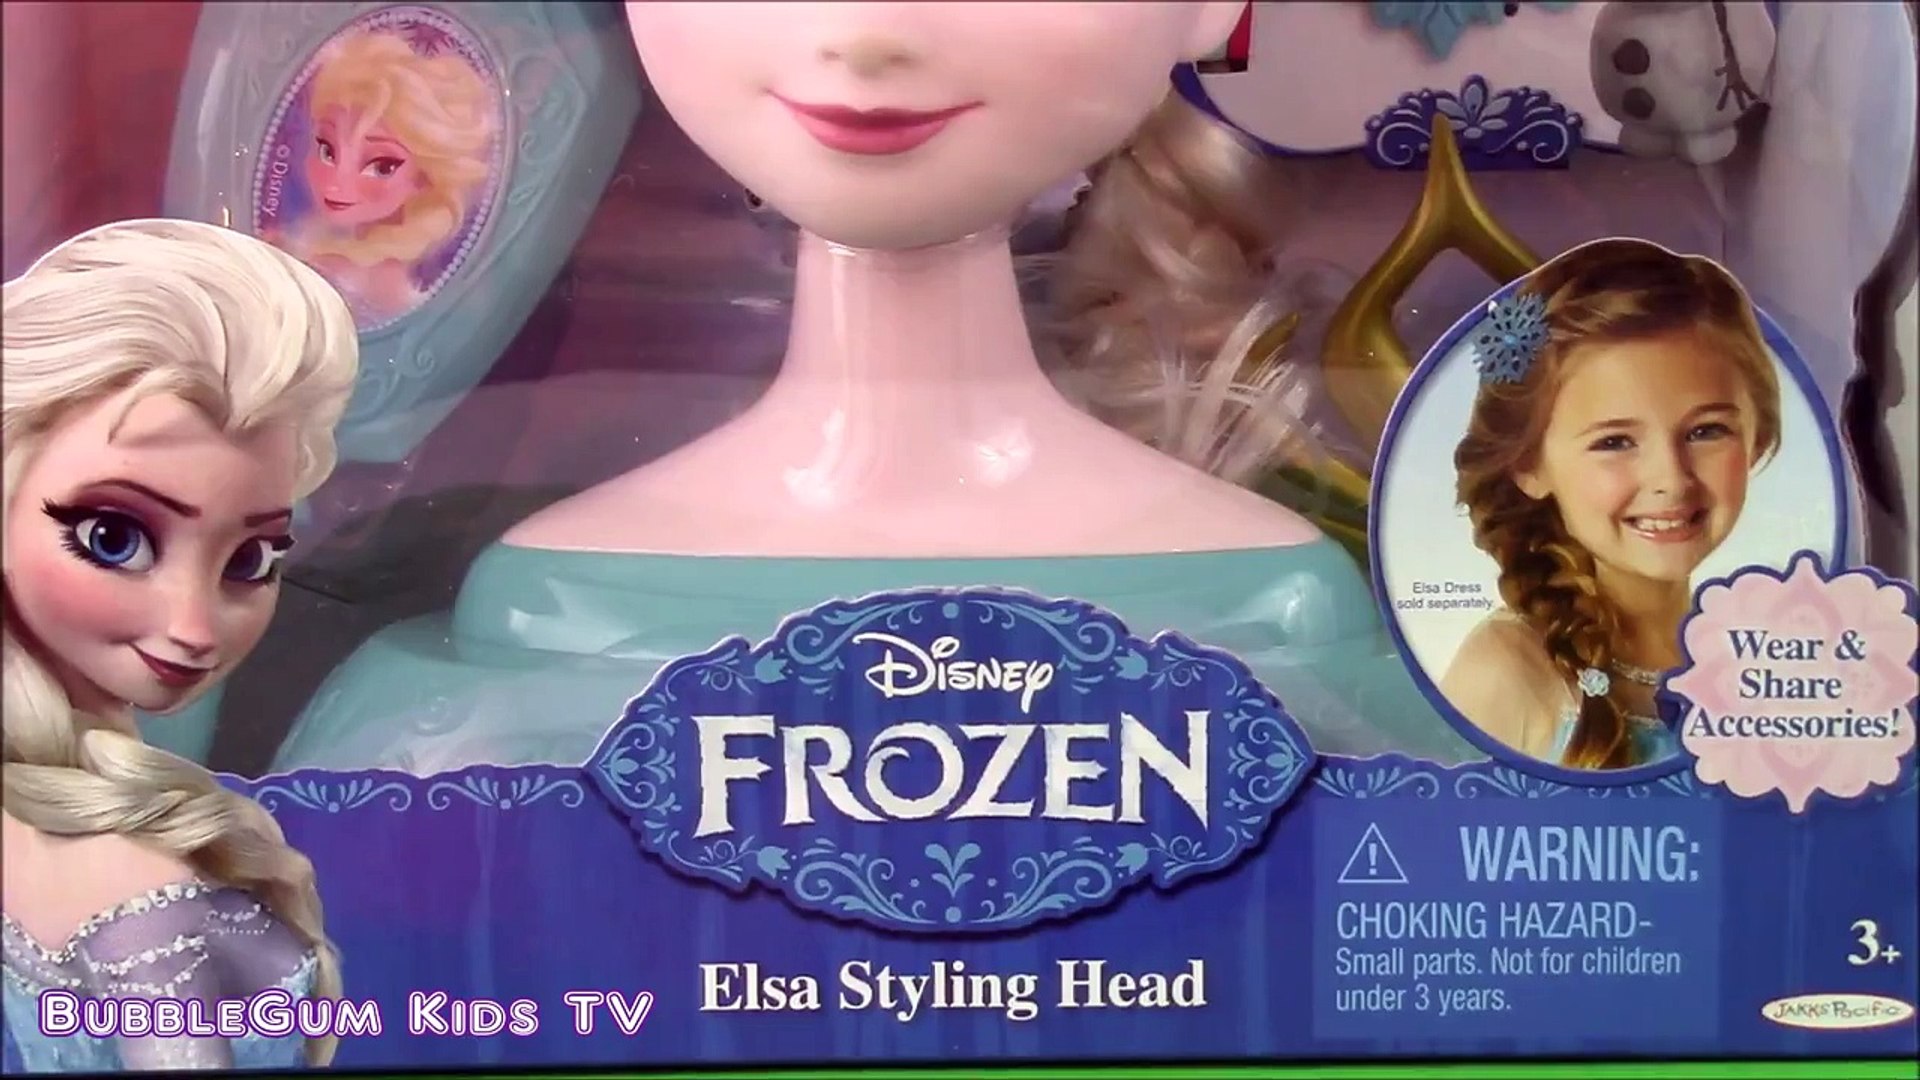 FUN Learning for KIDS TODDLERS how to brush and style Hair with Frozens Elsa Styling Head Doll!